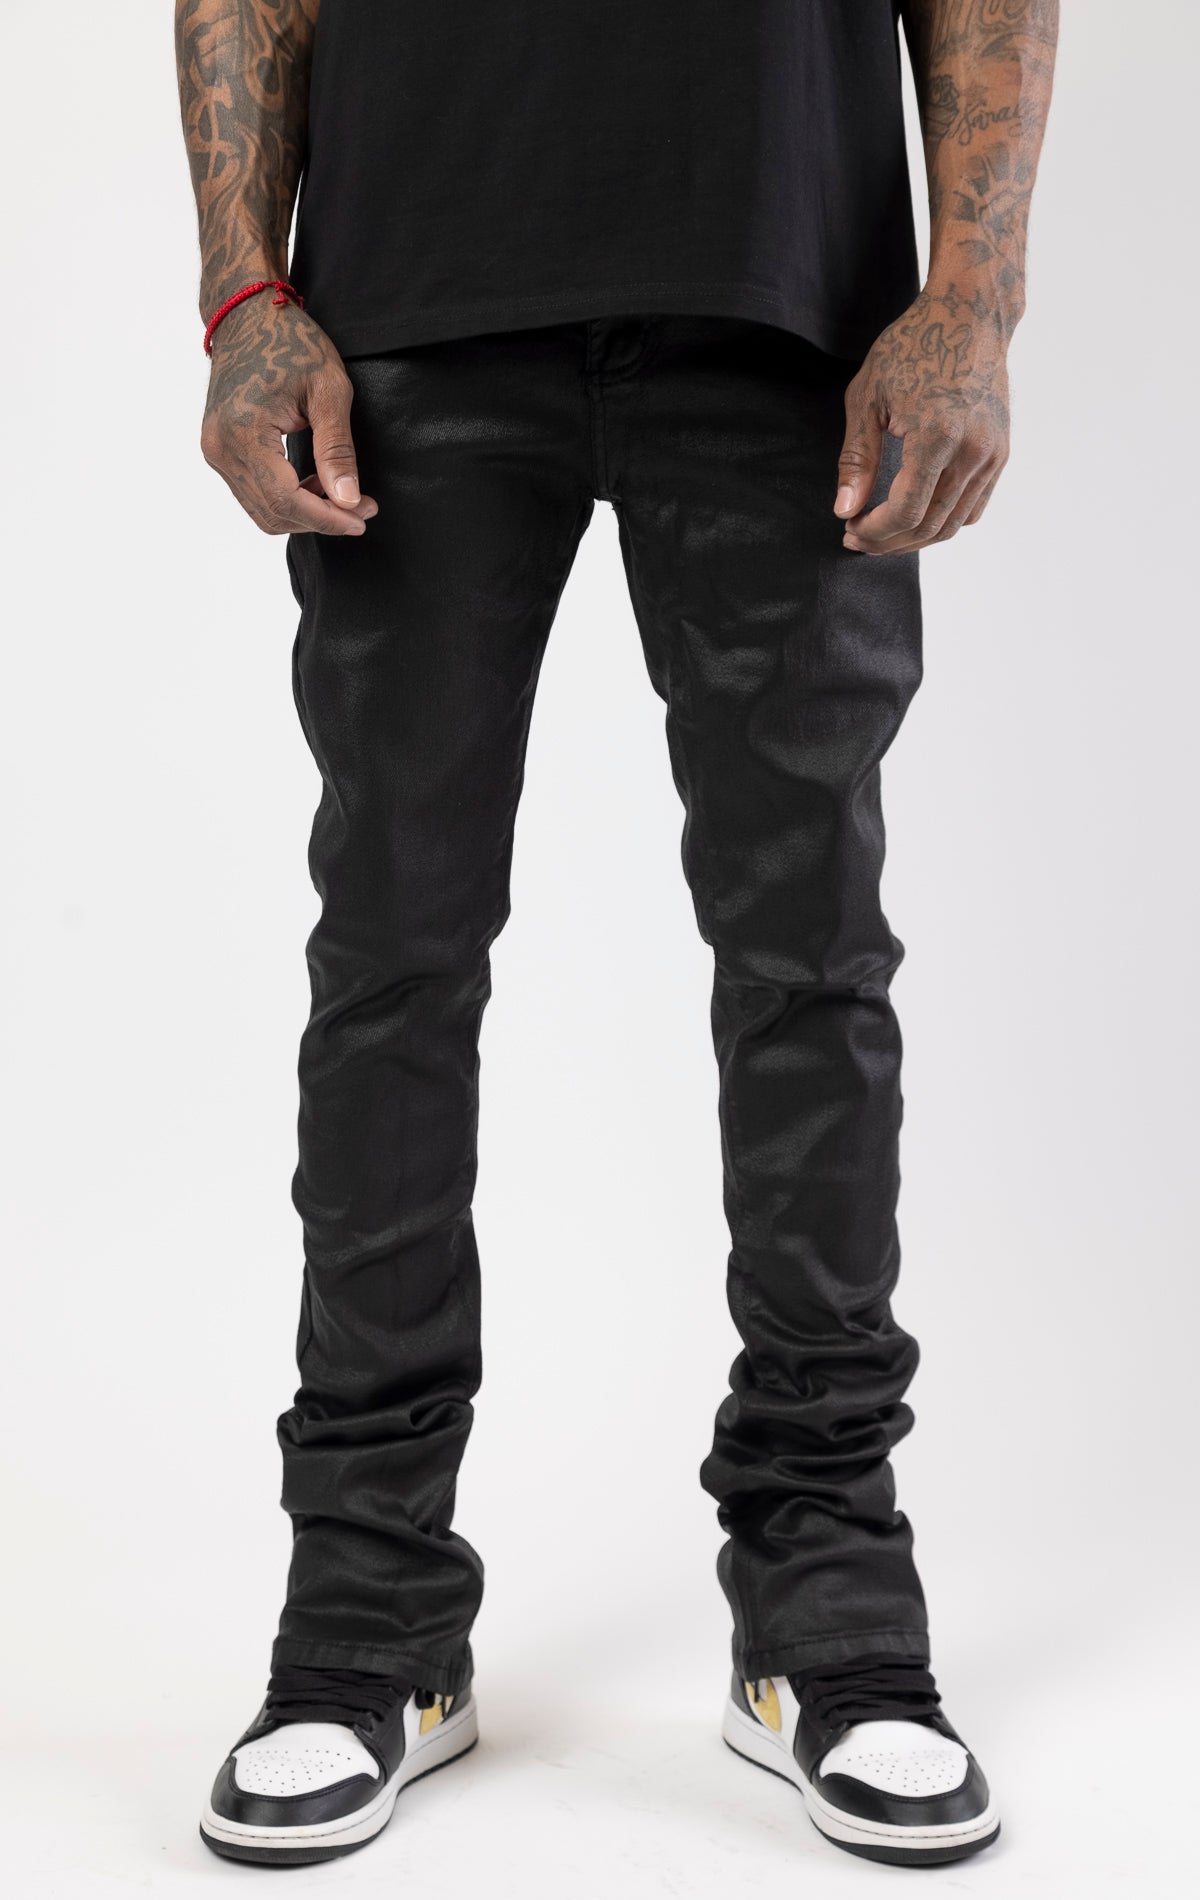 Glossy denim with a regular rise, flared stacked jeans